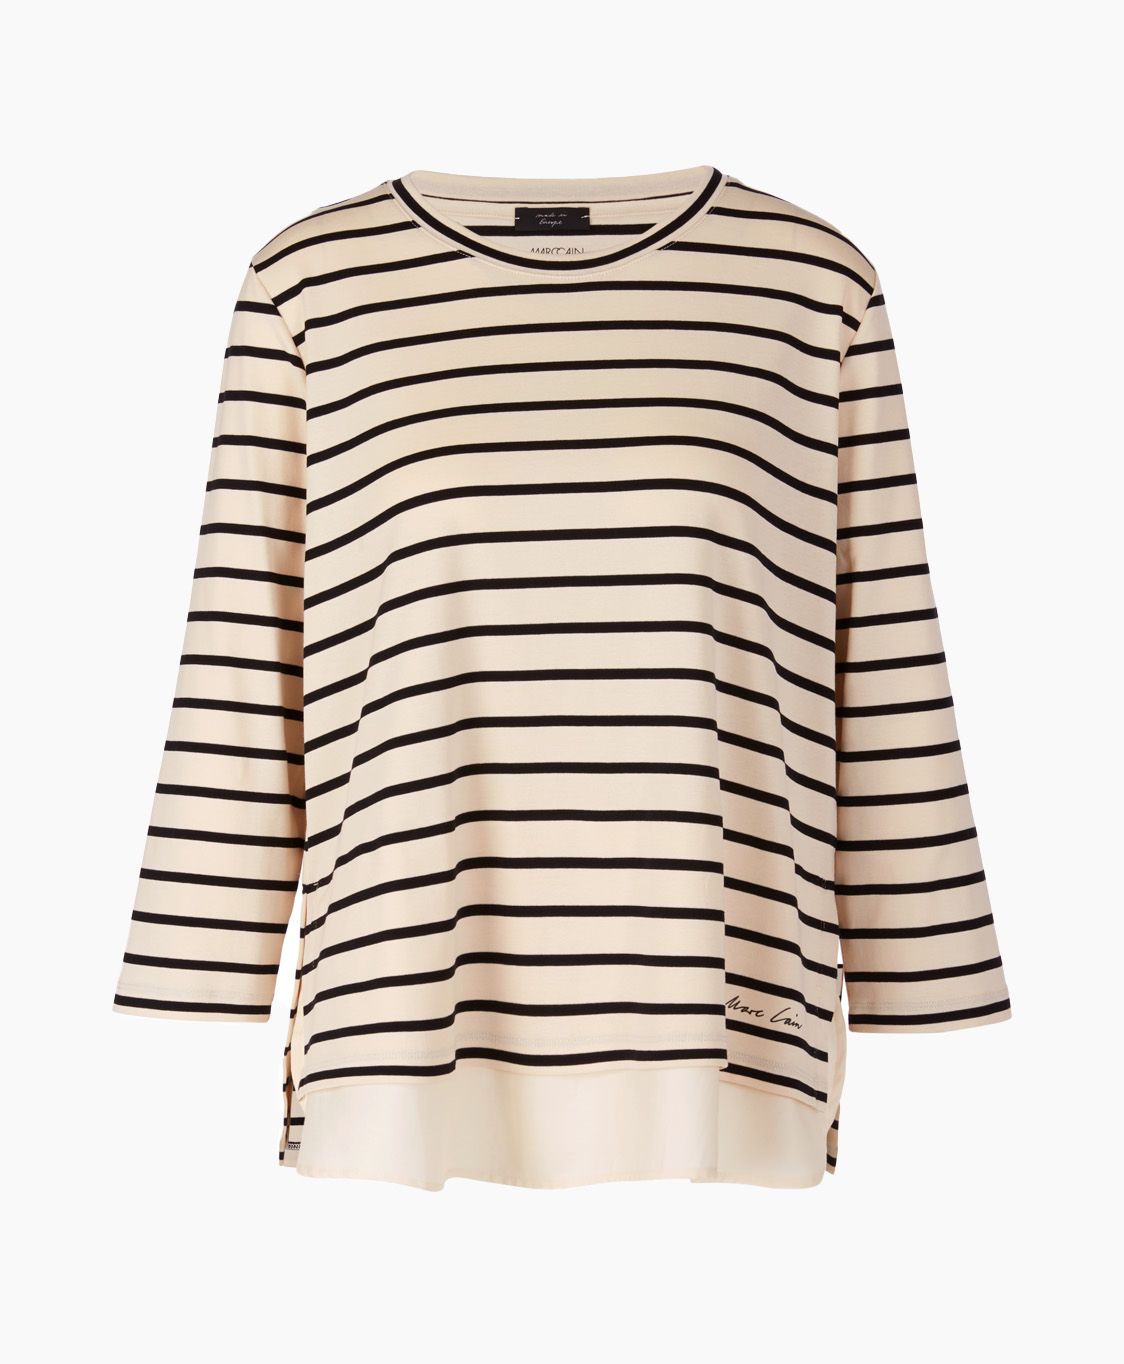 Marccain Collectie T-shirt Uc 48.28 J16 Room